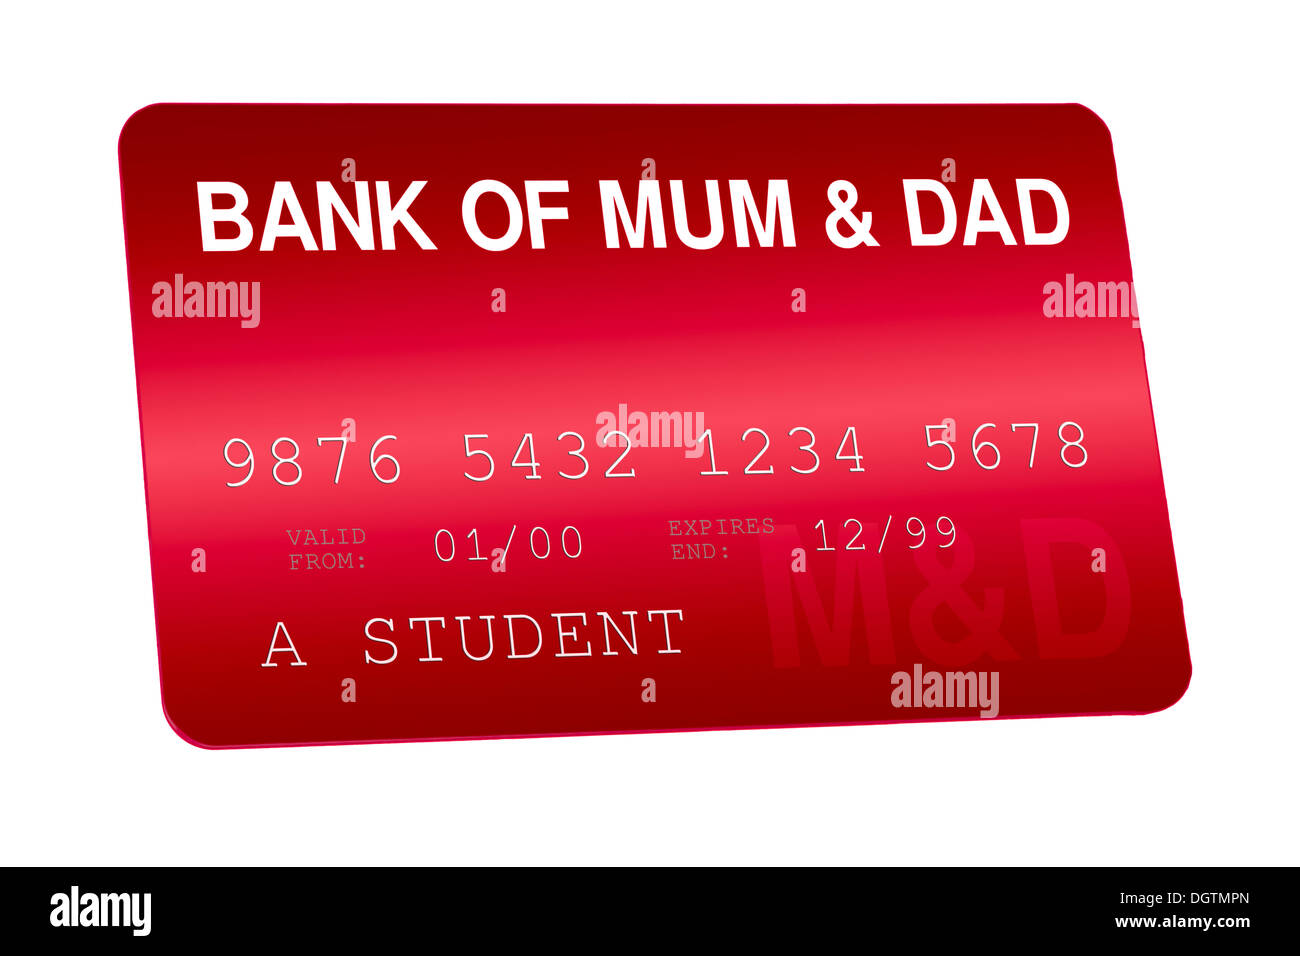 Bank of Mum and Dad Credit Card Family Finances Stock Photo